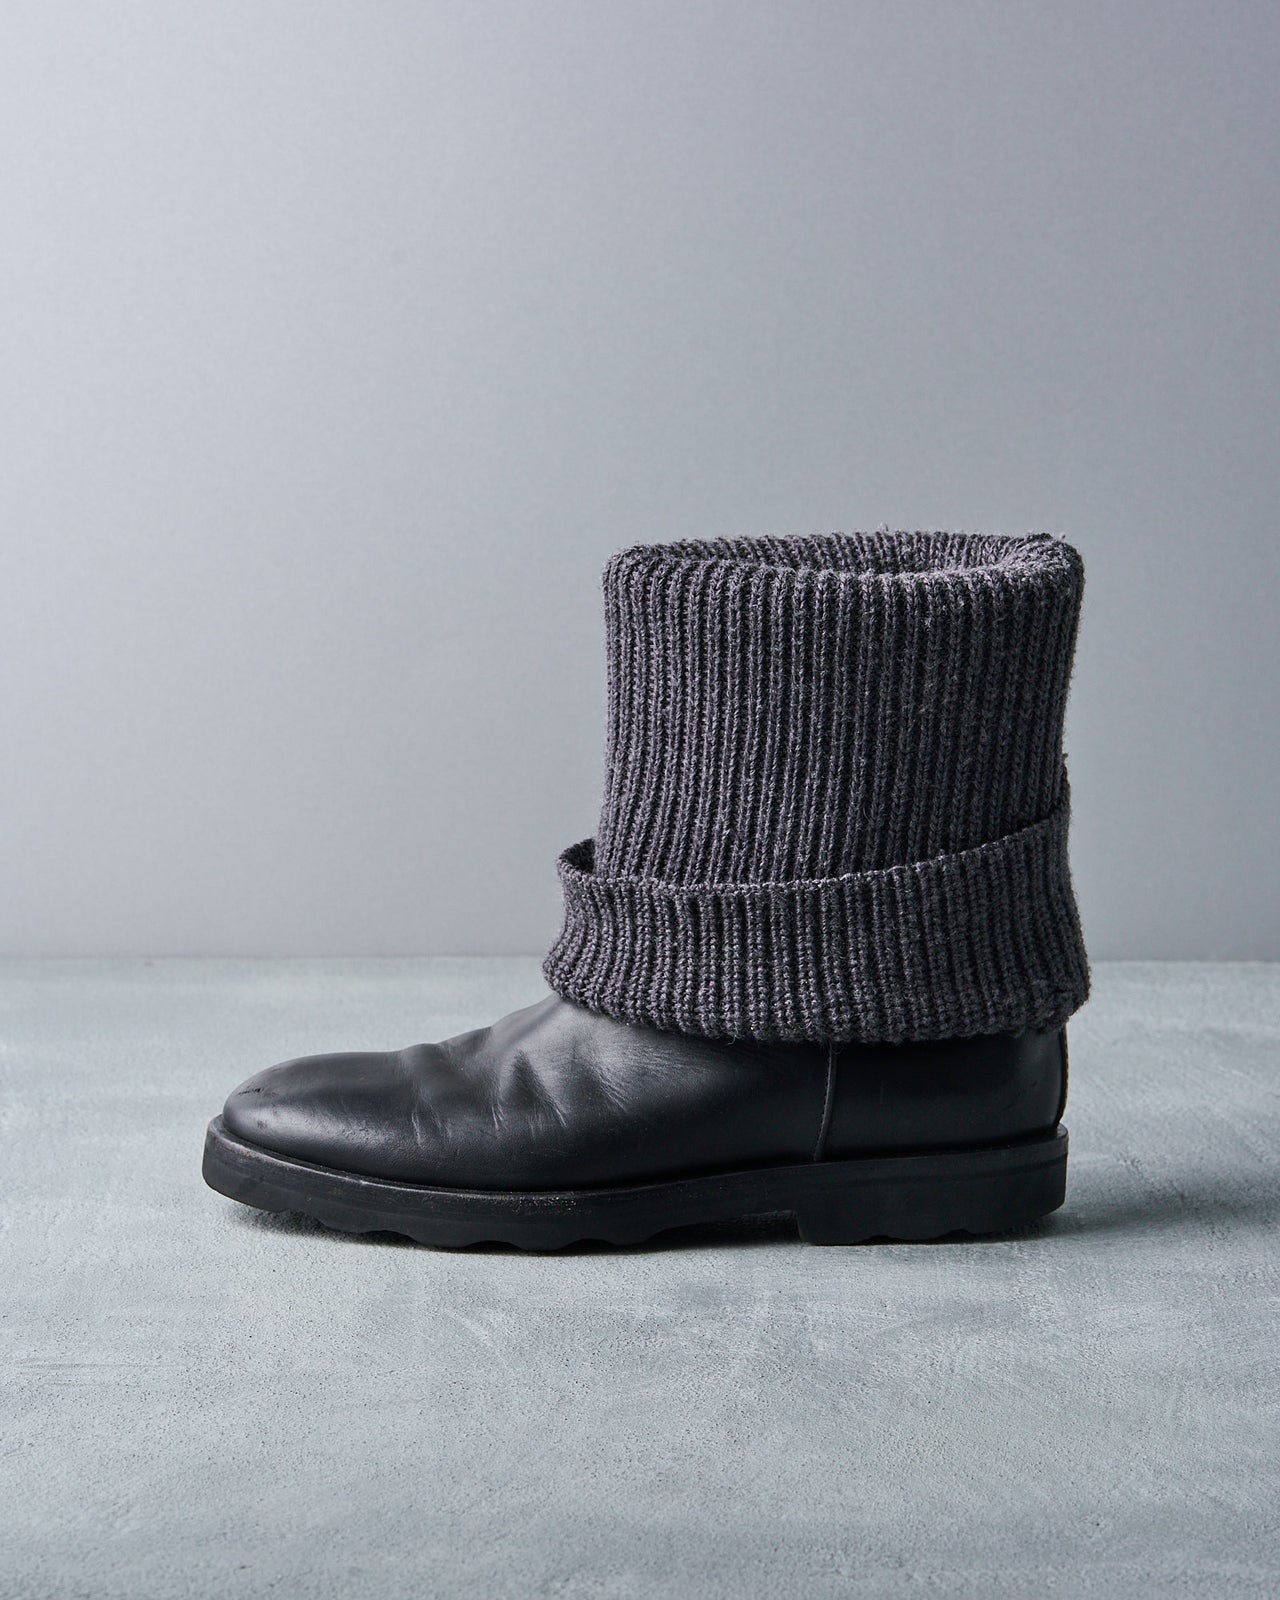 Maison Margiela AW 2011 Knit Over Boot